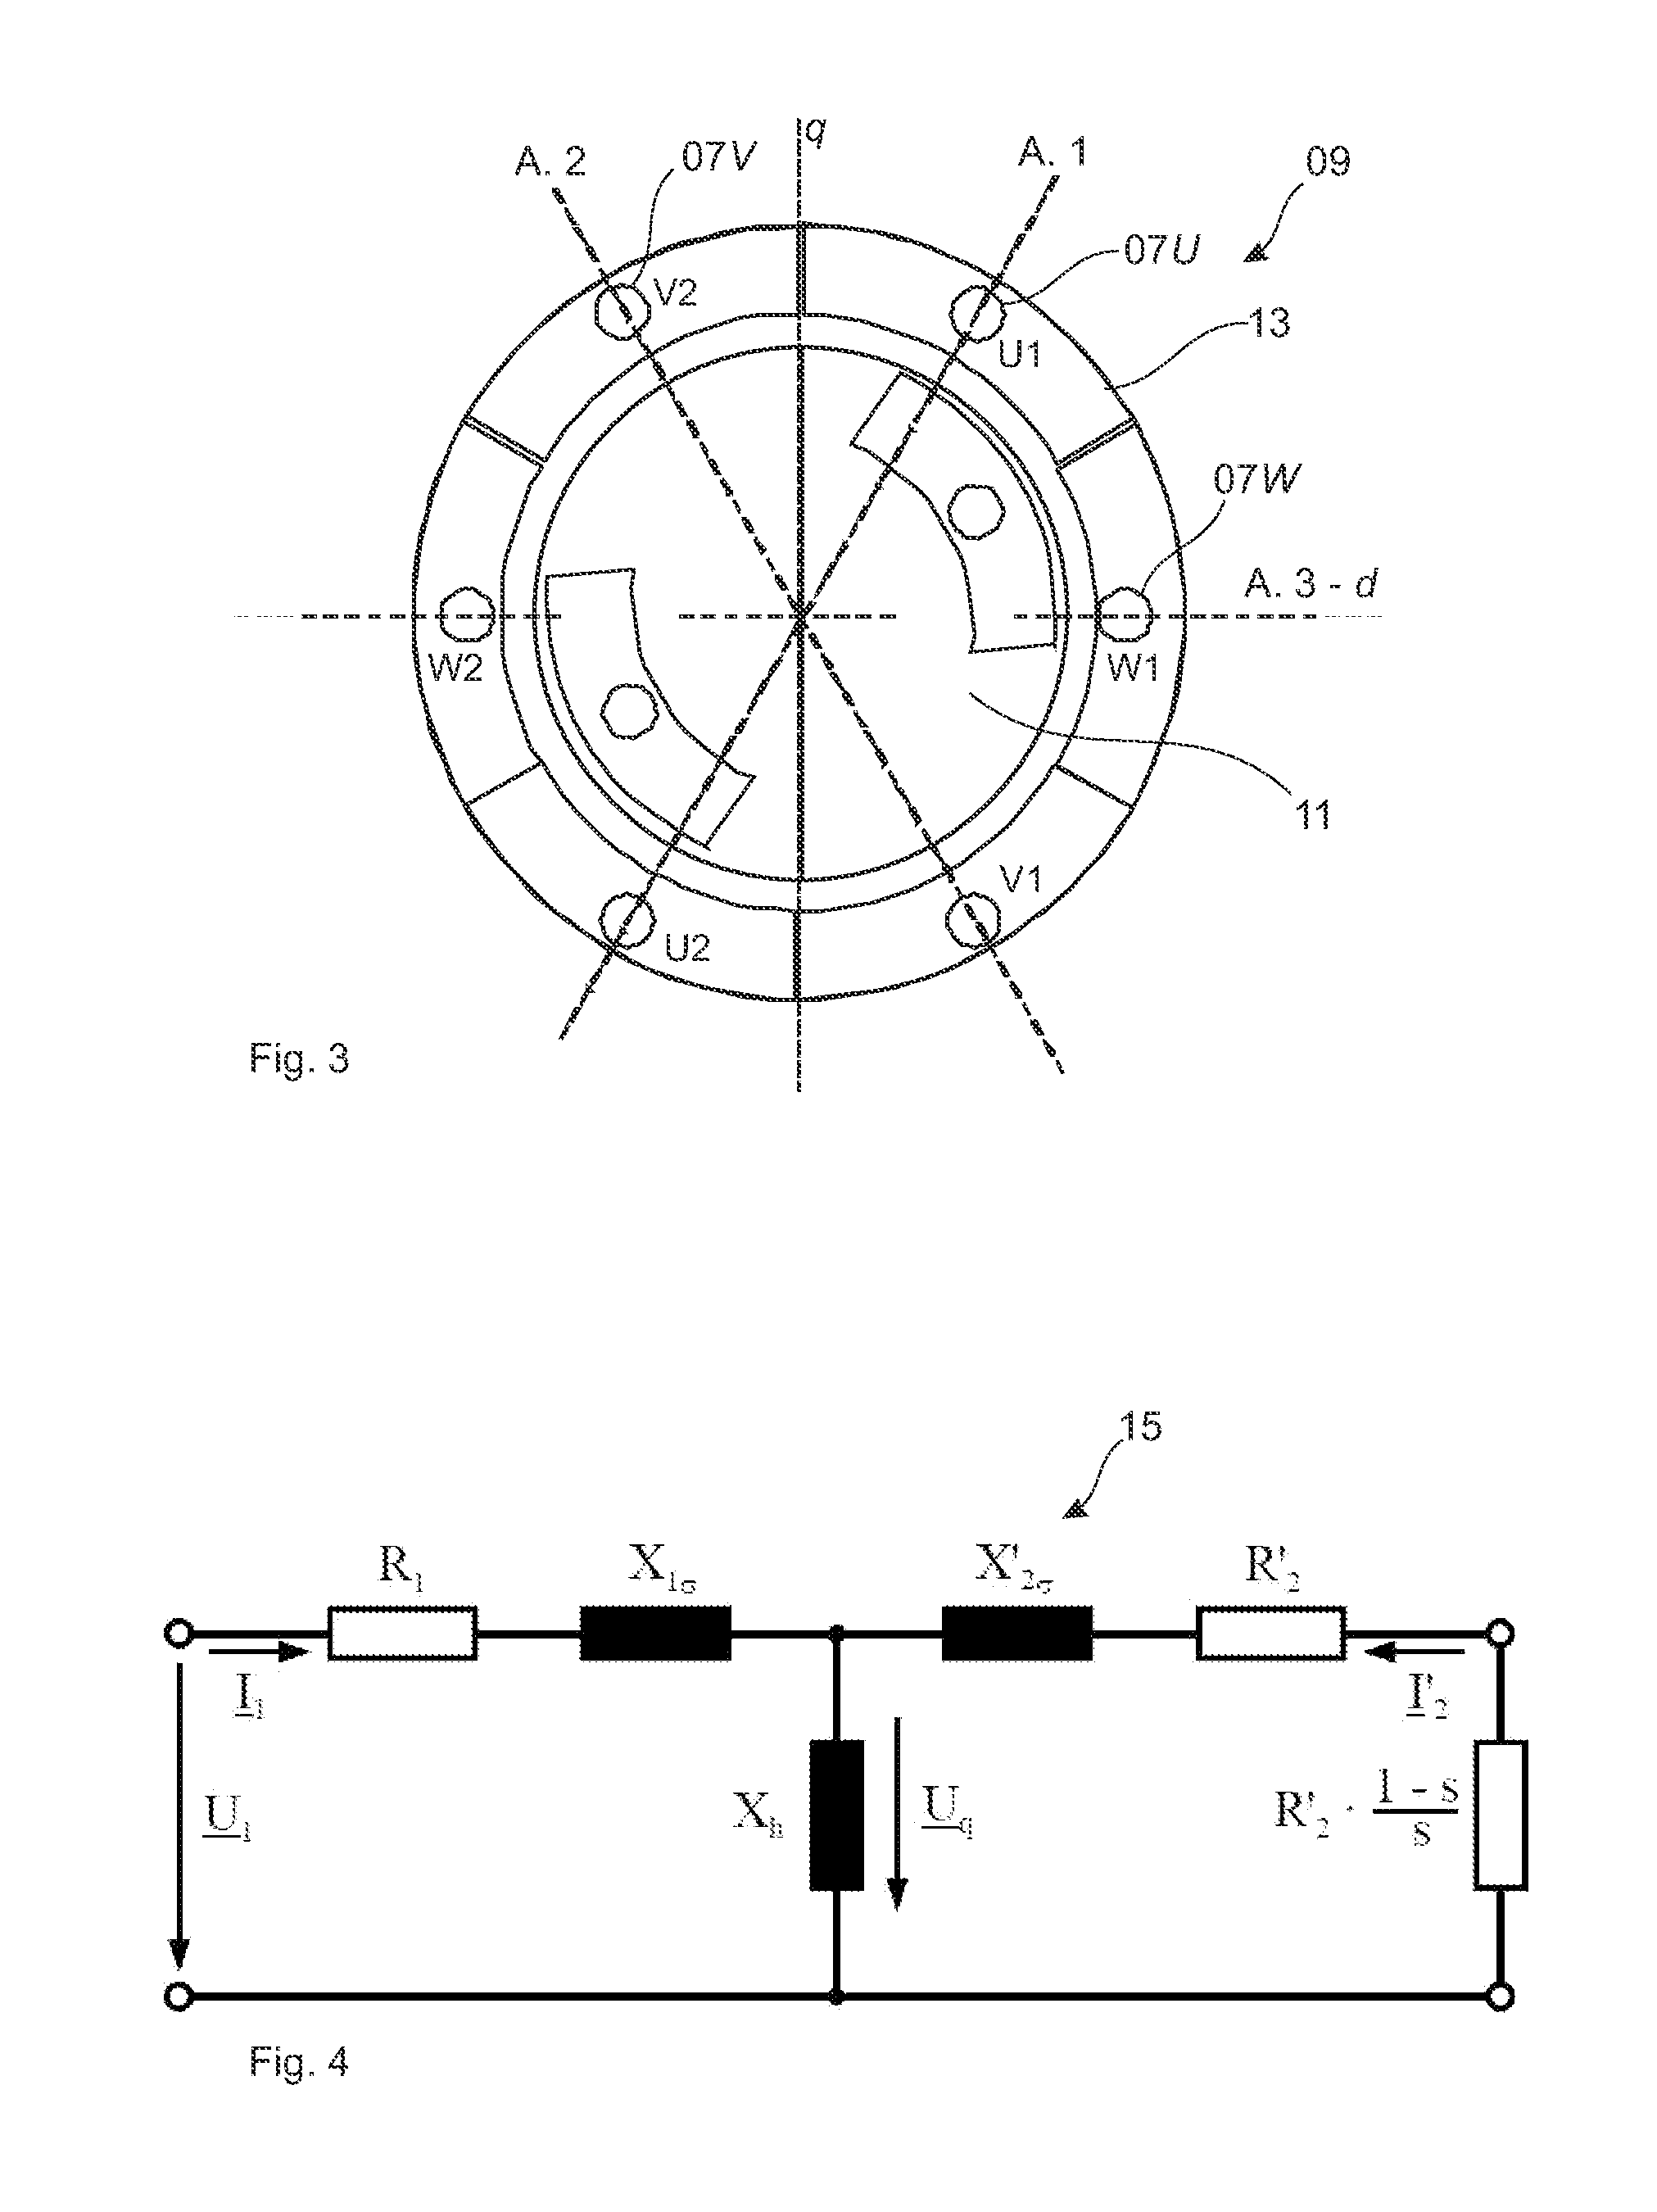 Apparatus And Method For Sensorless Identification Of Rotating Electrical Equivalent Circuit Parameters Of A Three-Phase Asynchronous Motor